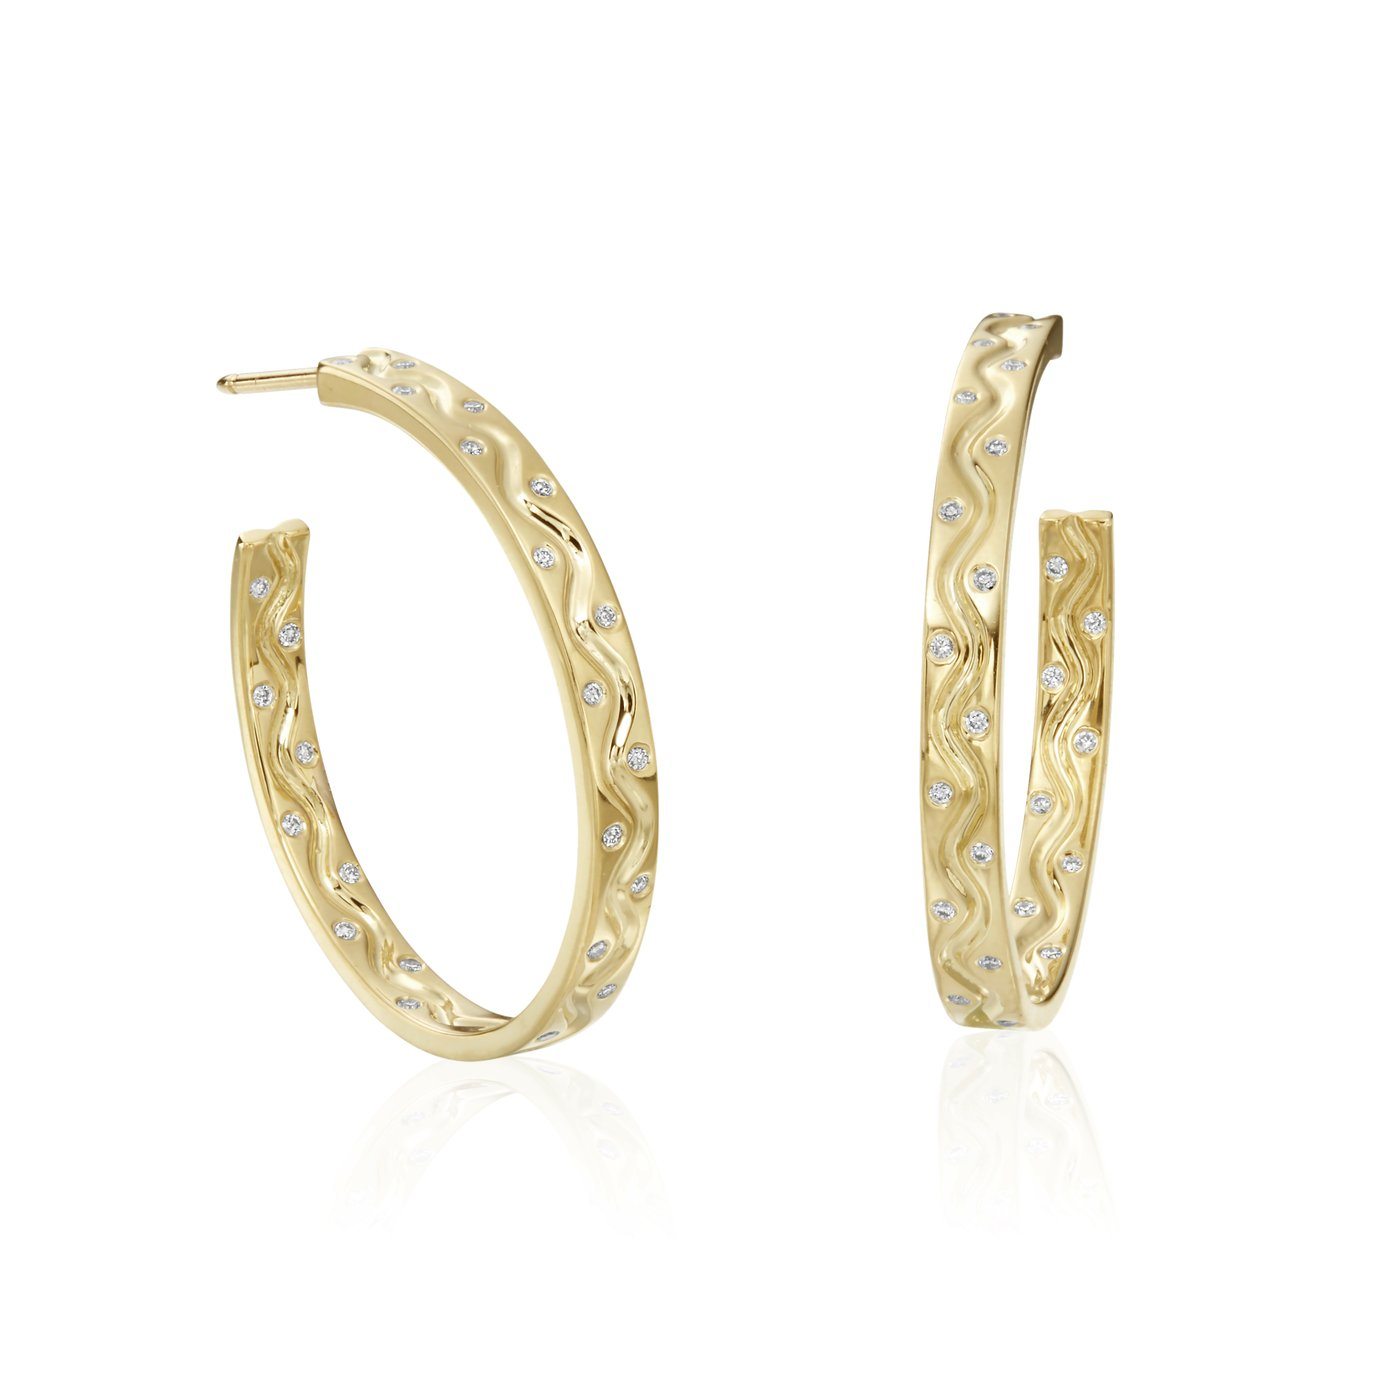 5 Gold Hoop Earrings You Will Rock This Fall | Misahara